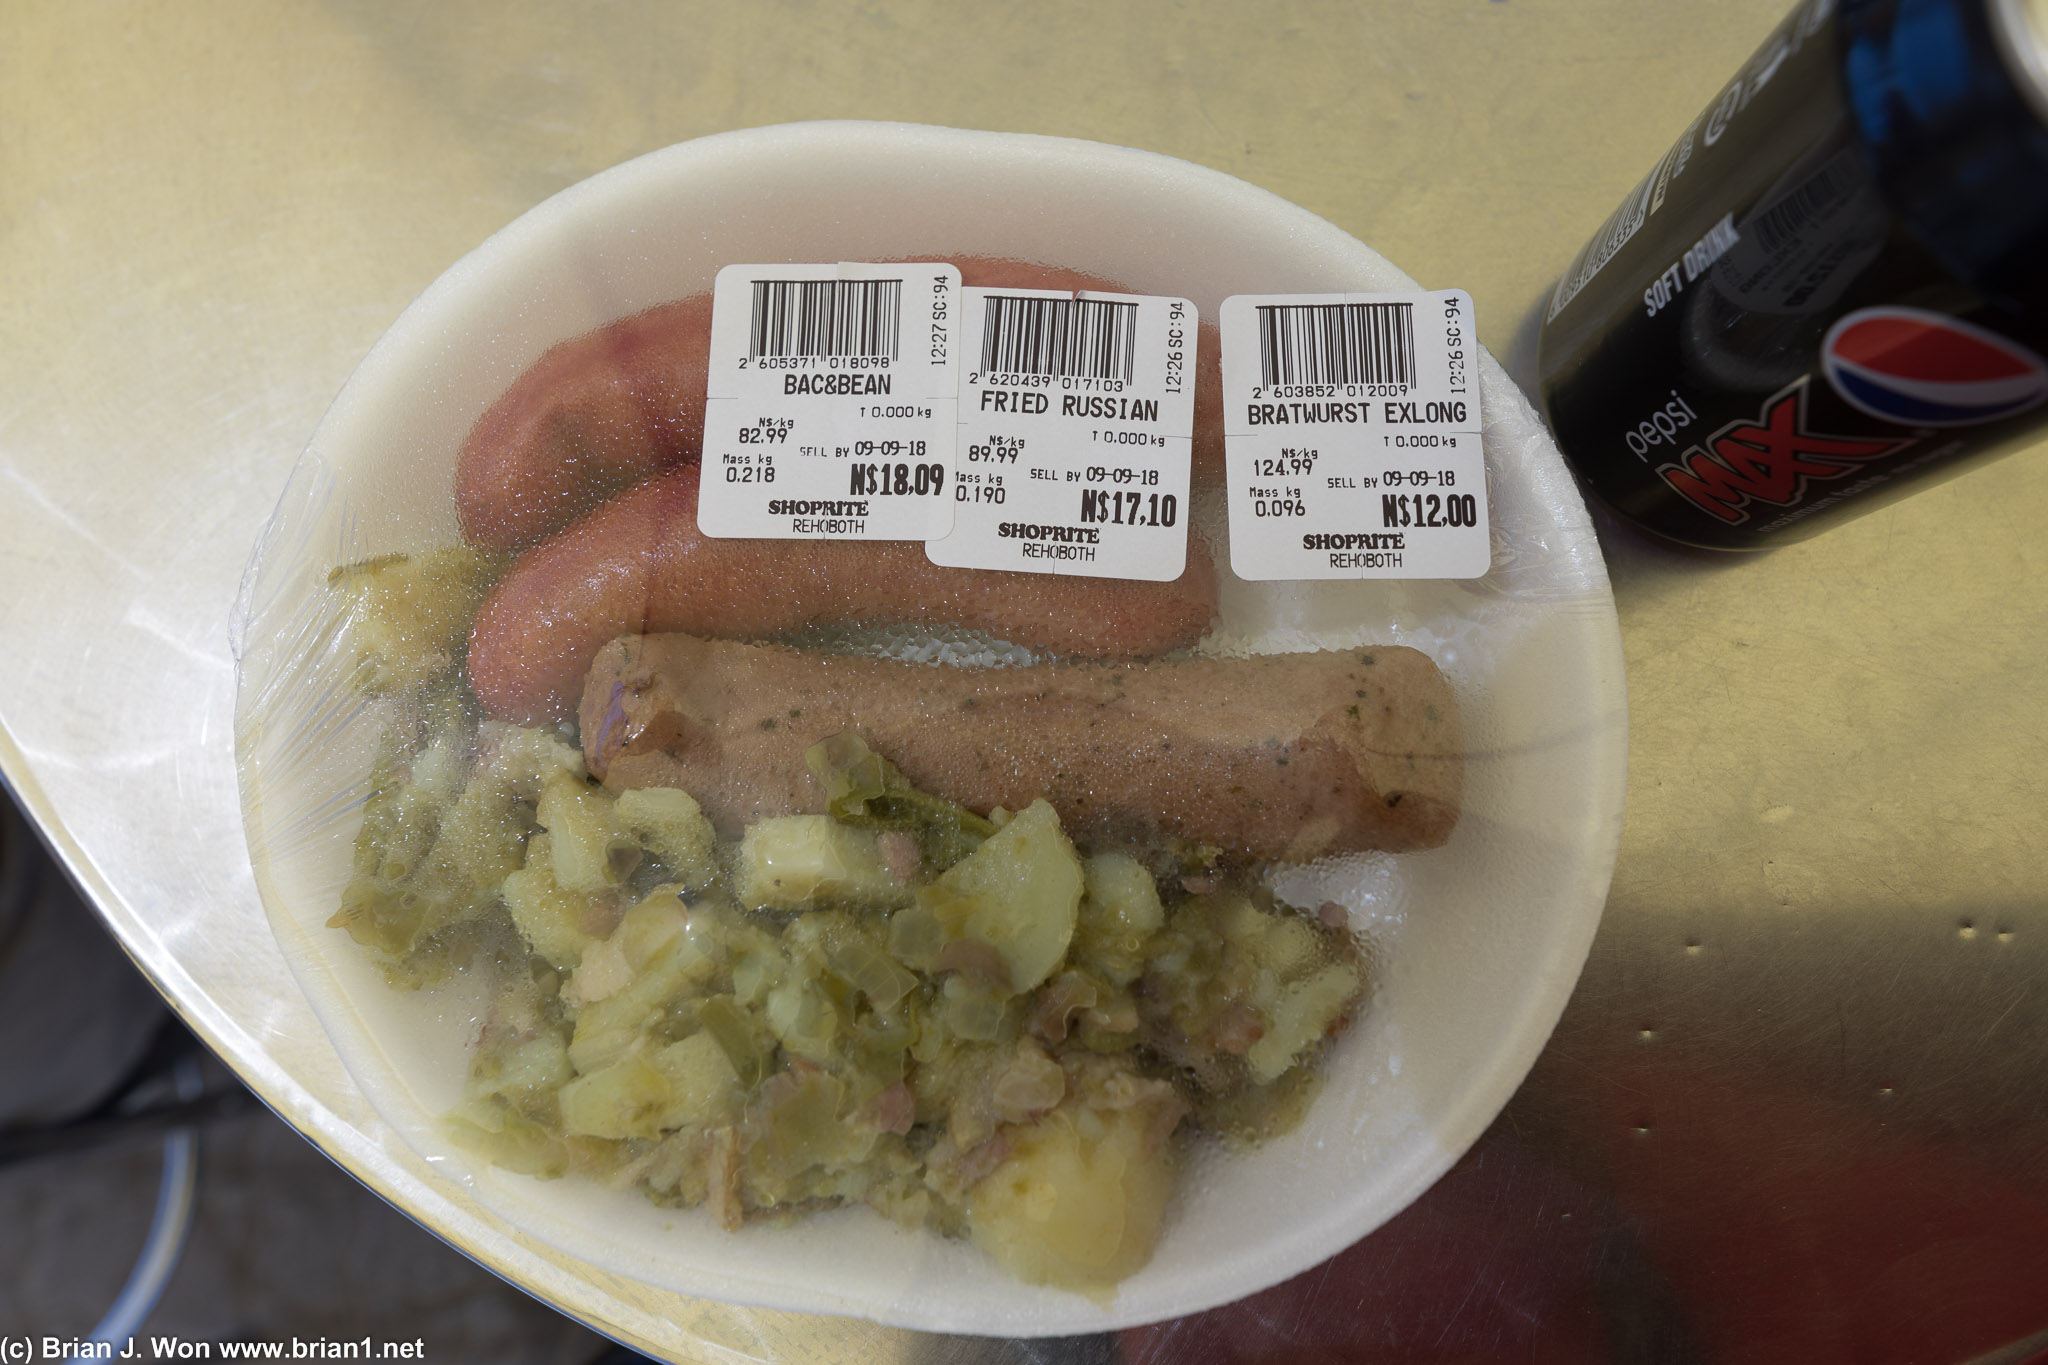 From the deli counter at Shoprite supermarket in Rehoboth.